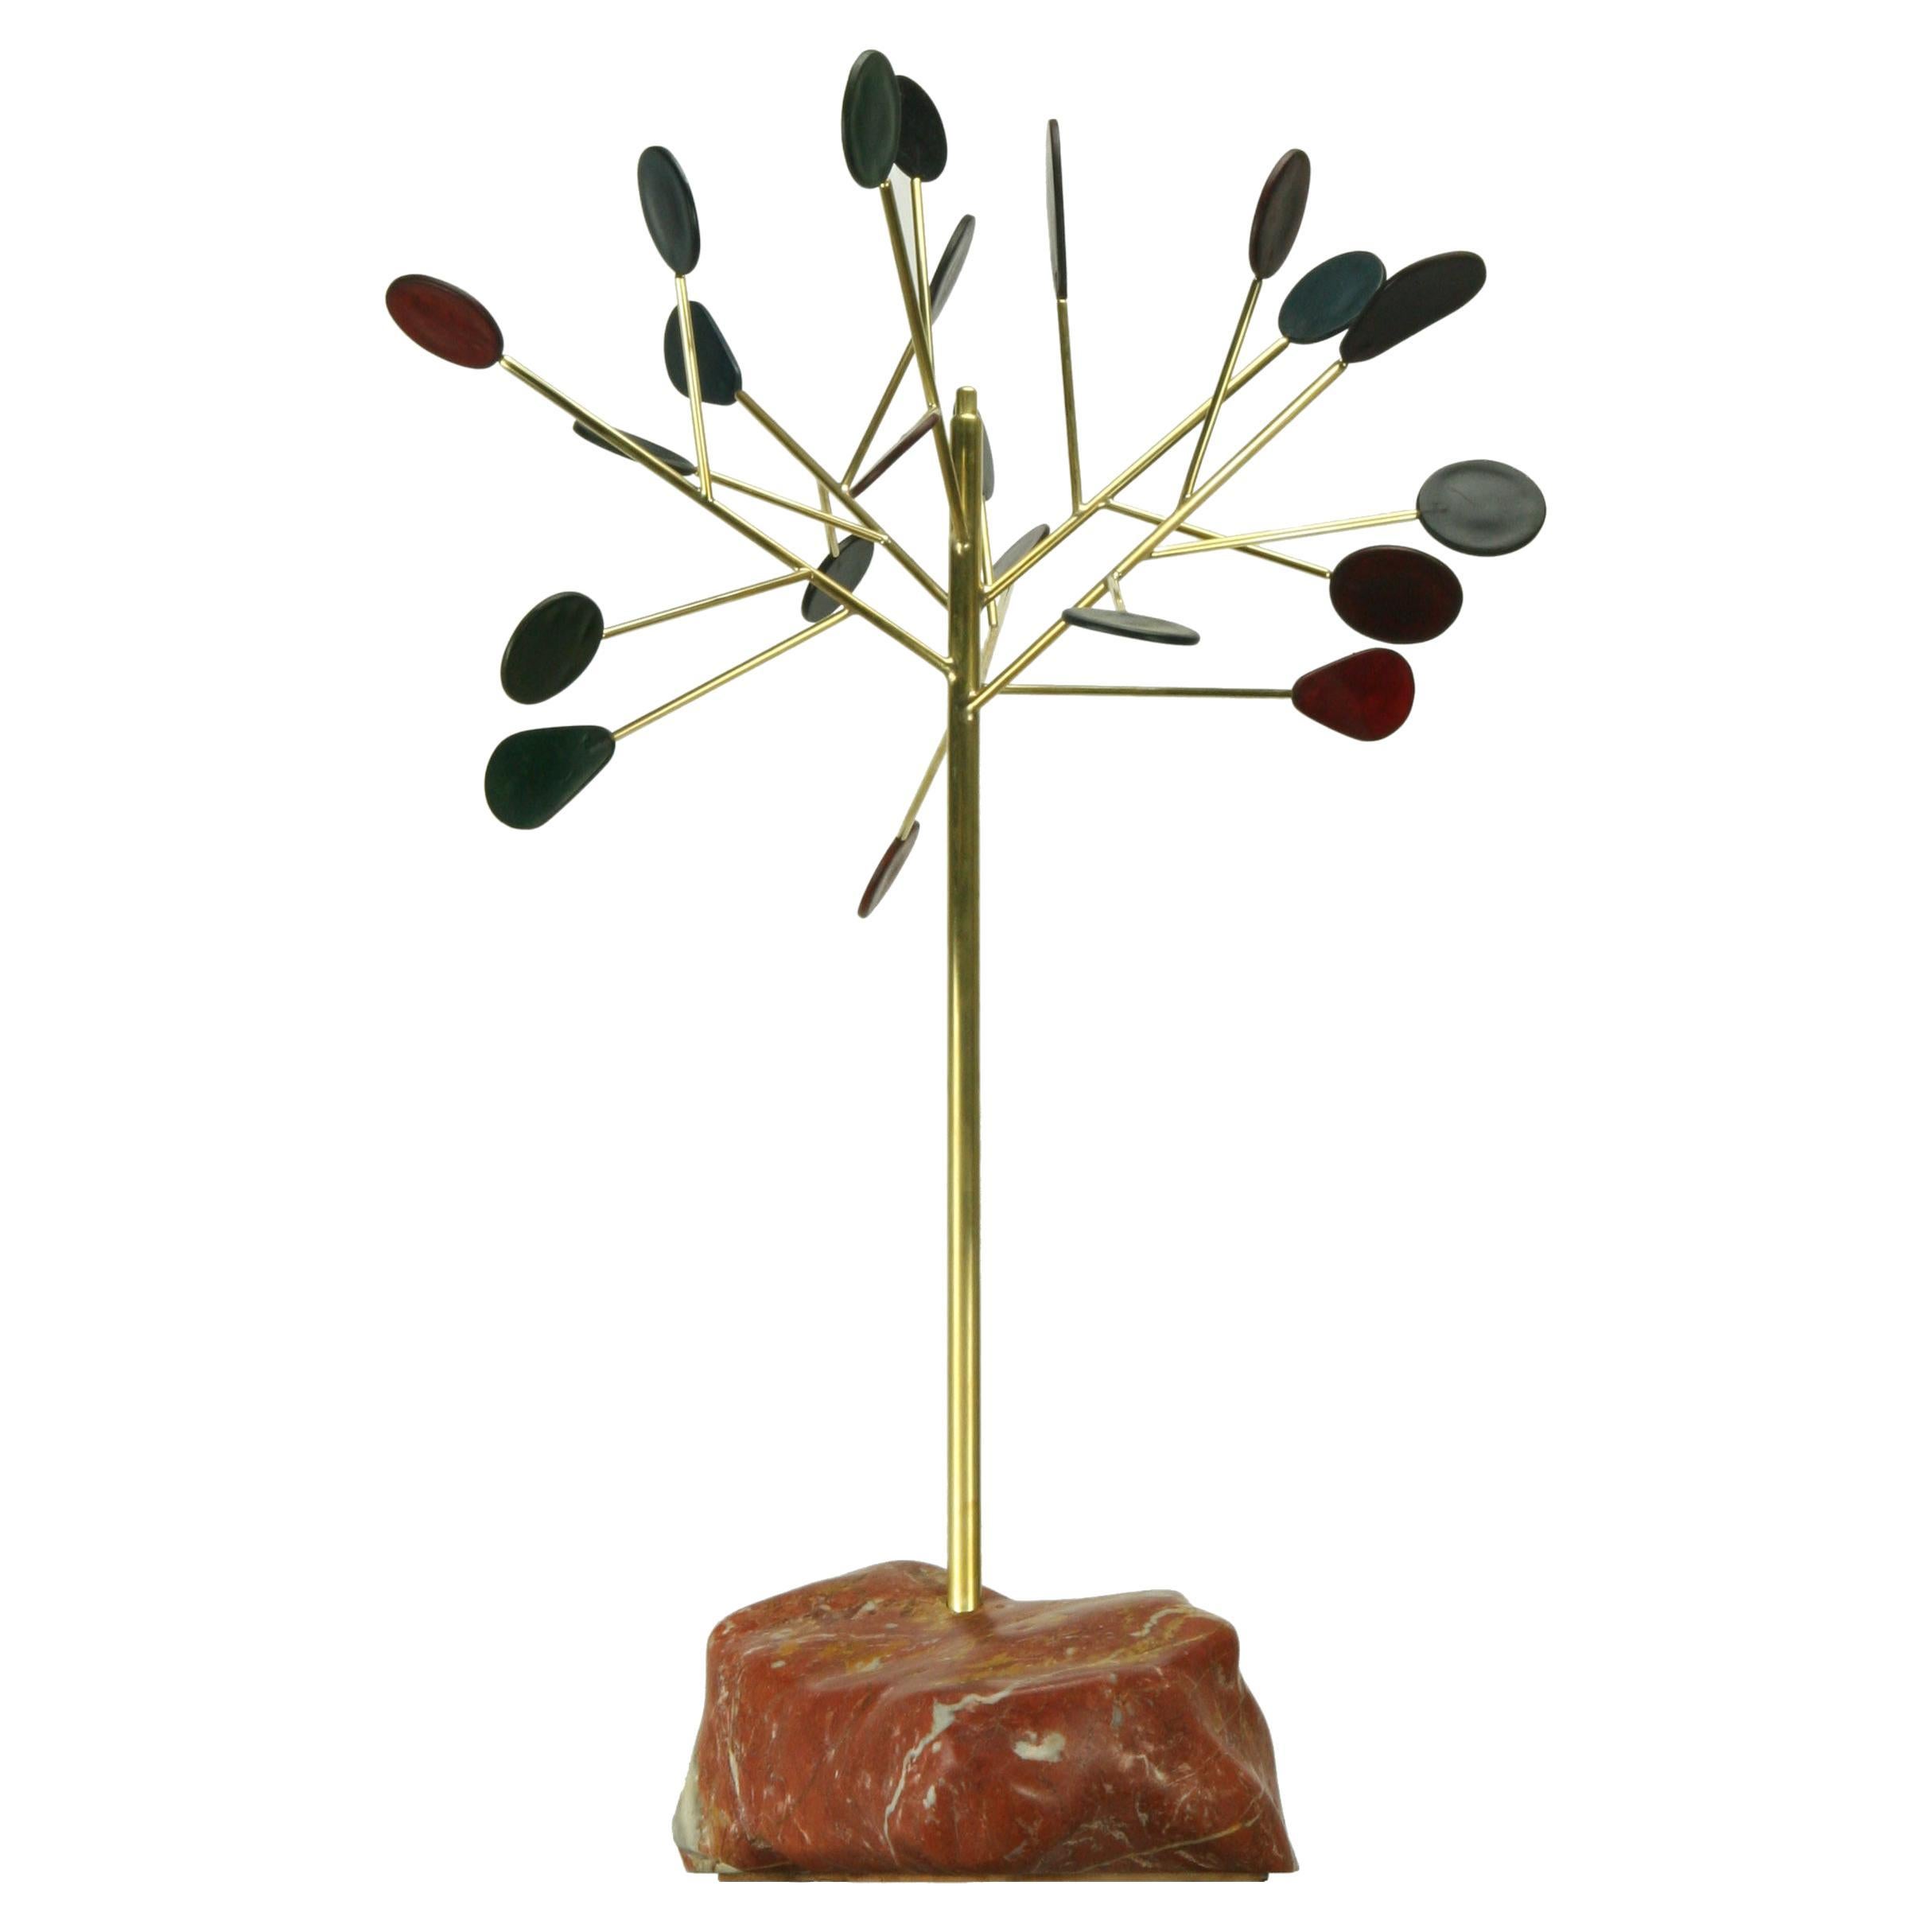 Locus-21 Tree Sculpture of Brass, Marble and Leather For Sale